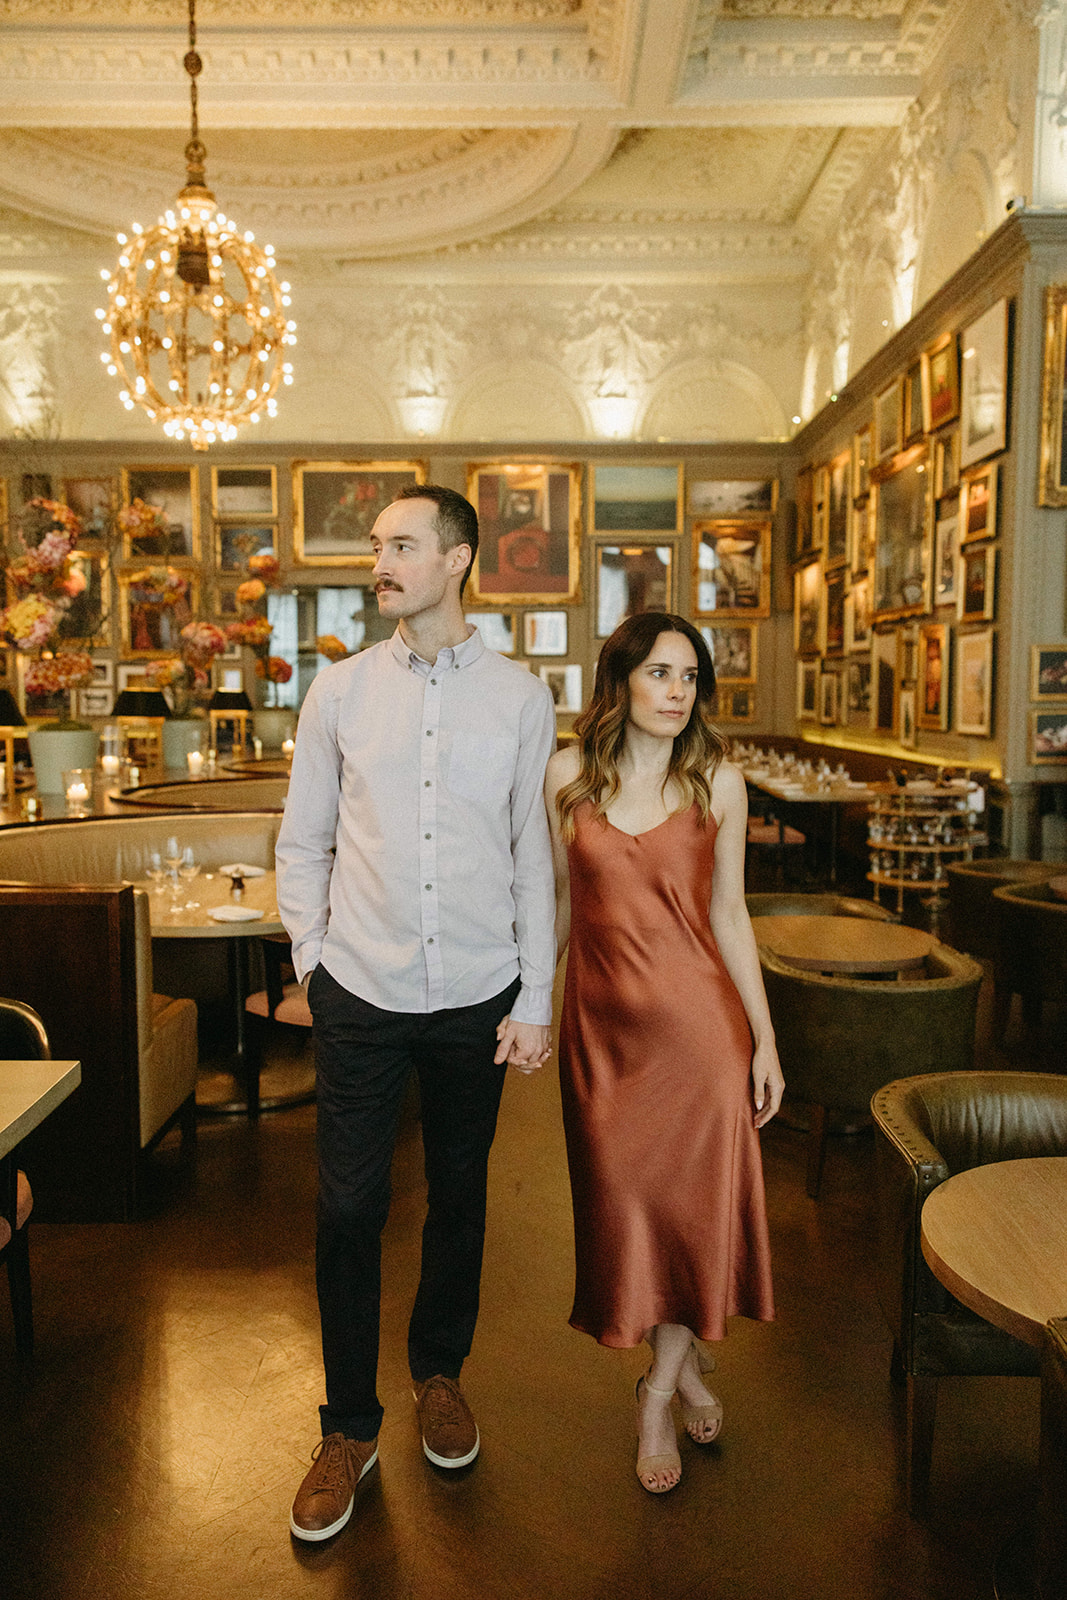 A couple looks opposite ways while holding hands in an elevated tavern decorated with vintage artwork and chandeliers. 